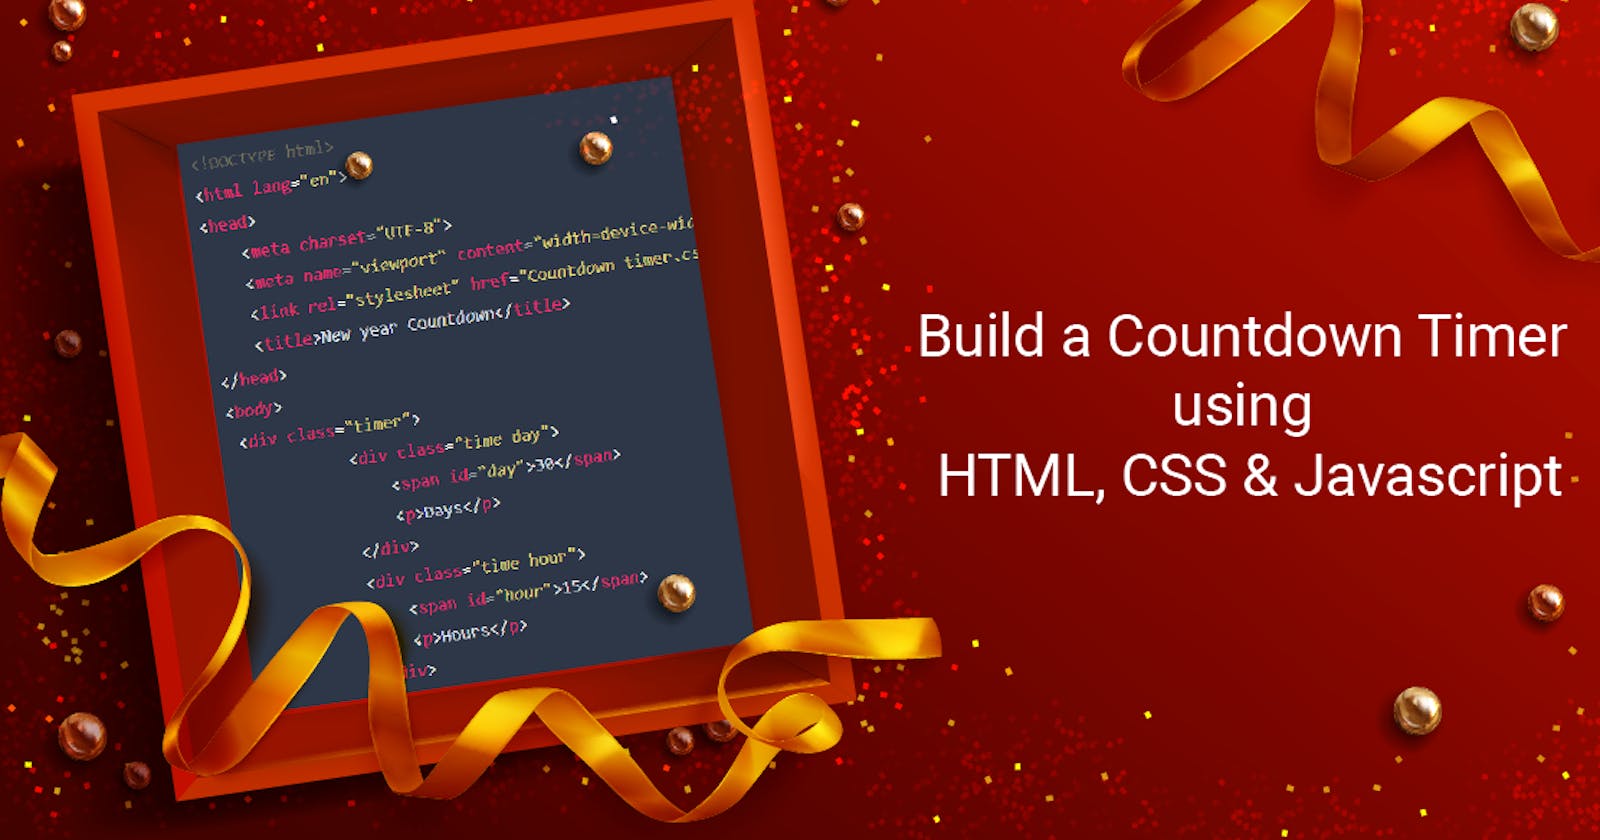 Build a Countdown Timer using 
HTML, CSS & Javascript